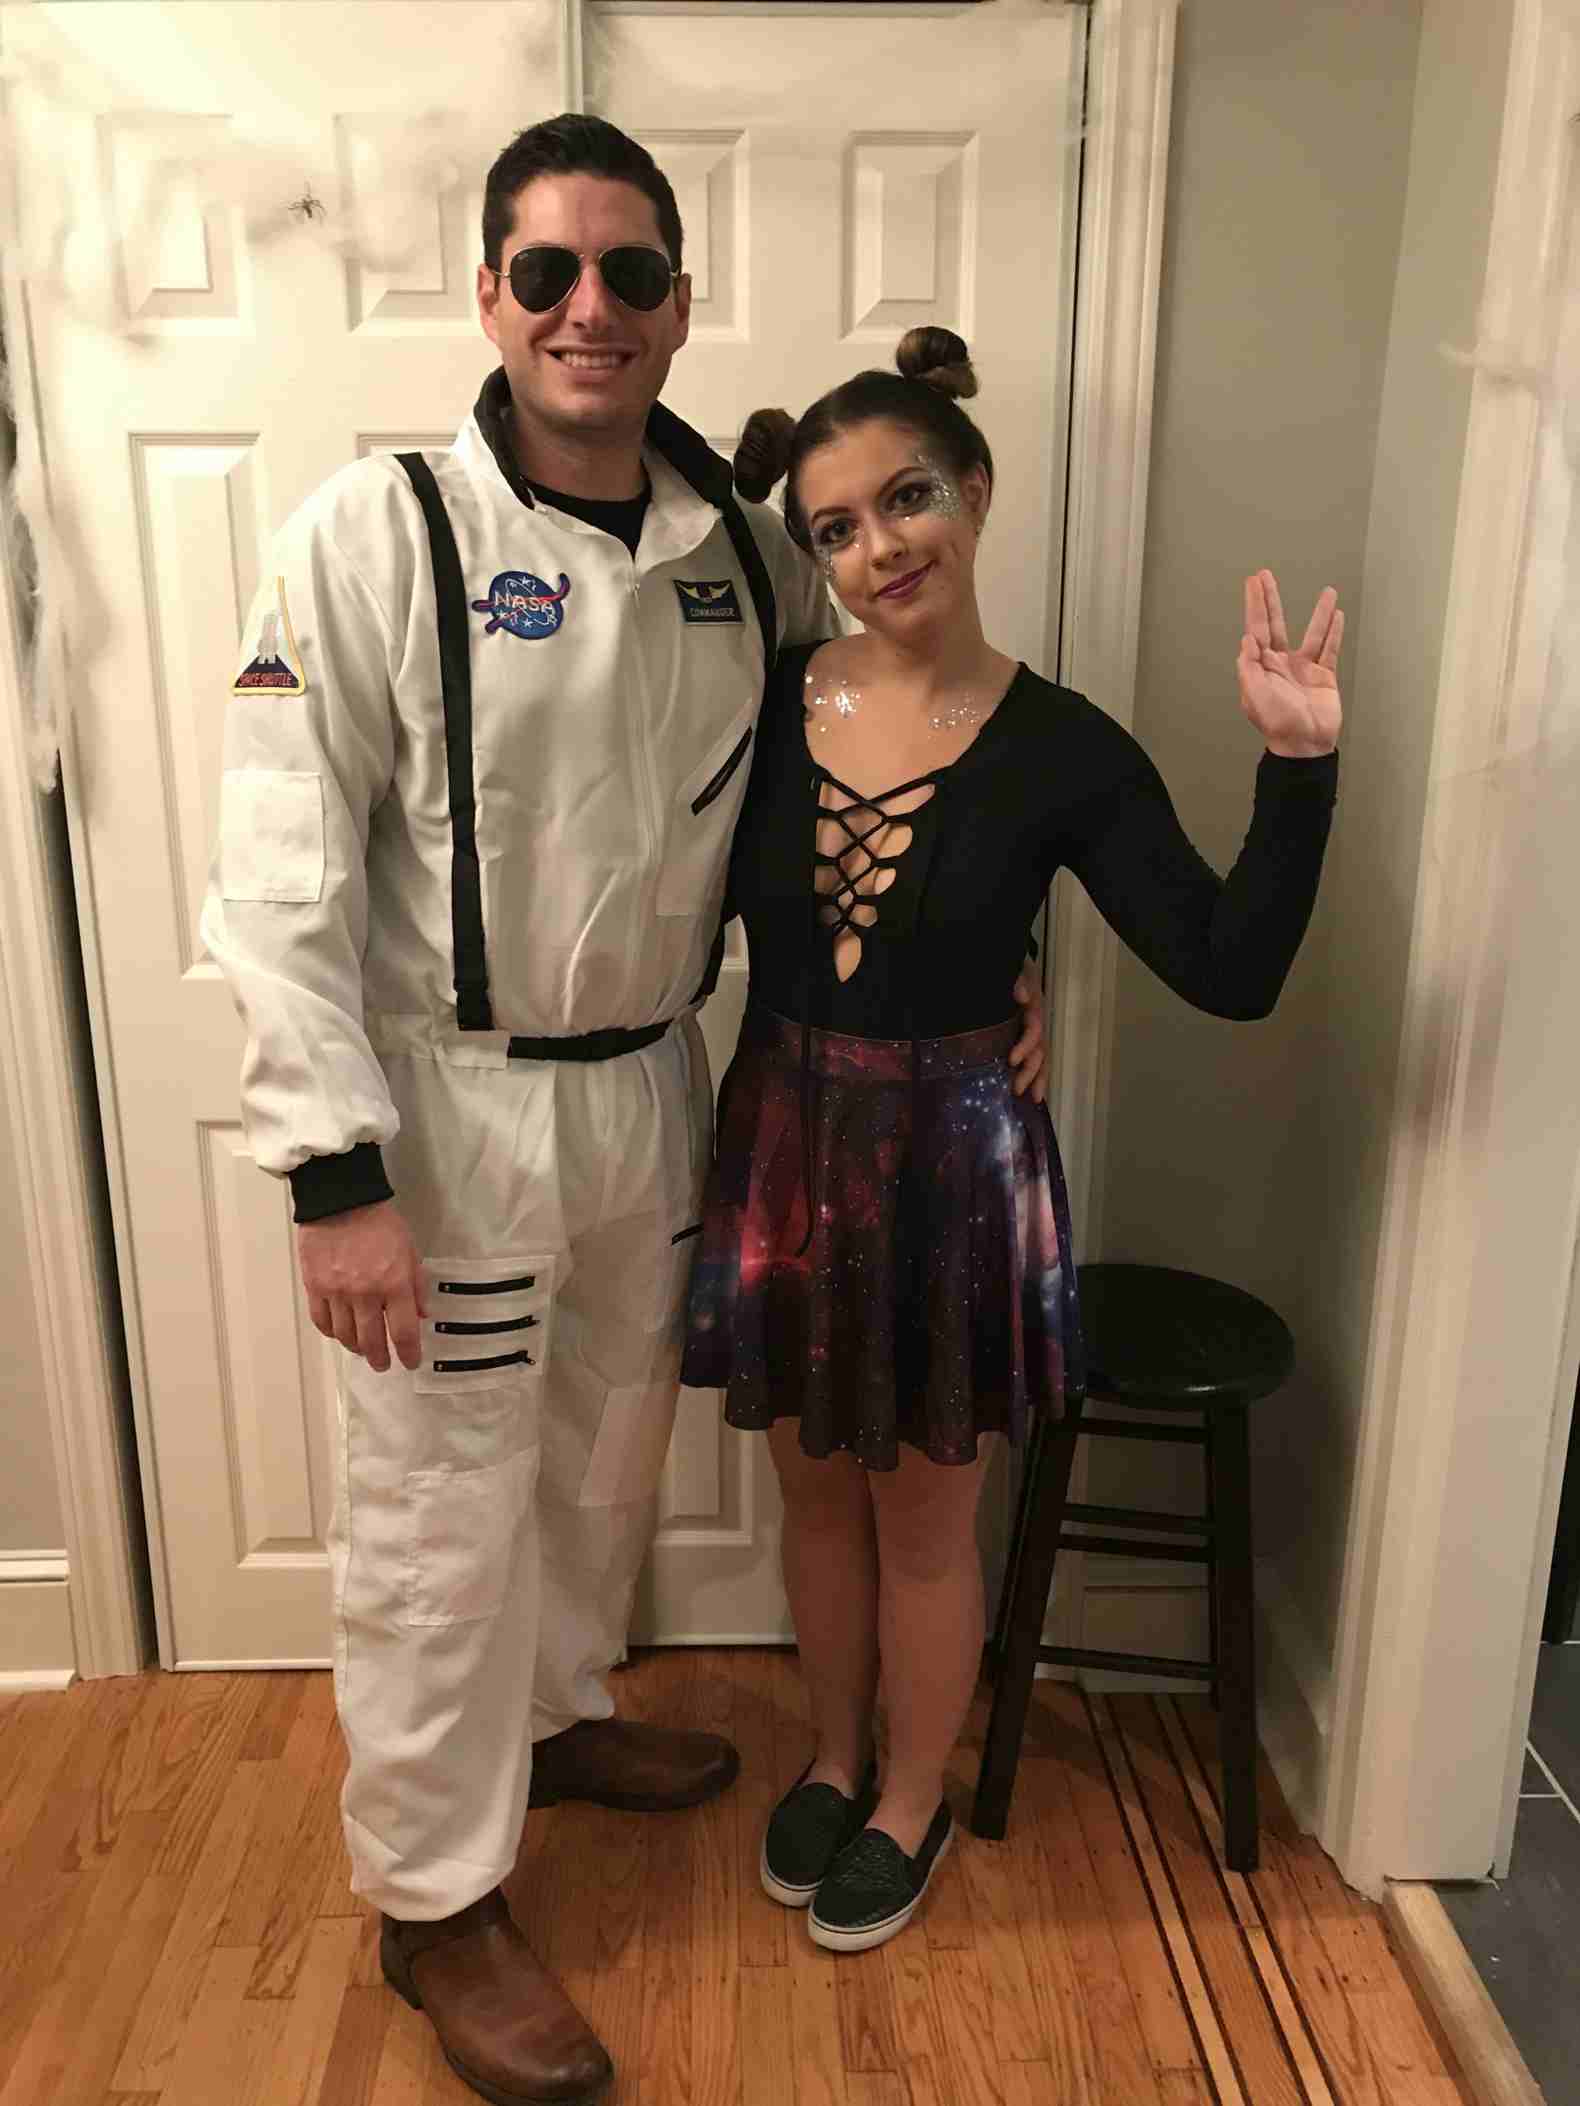 Couple of Costume Ideas Funny Halloween Trends